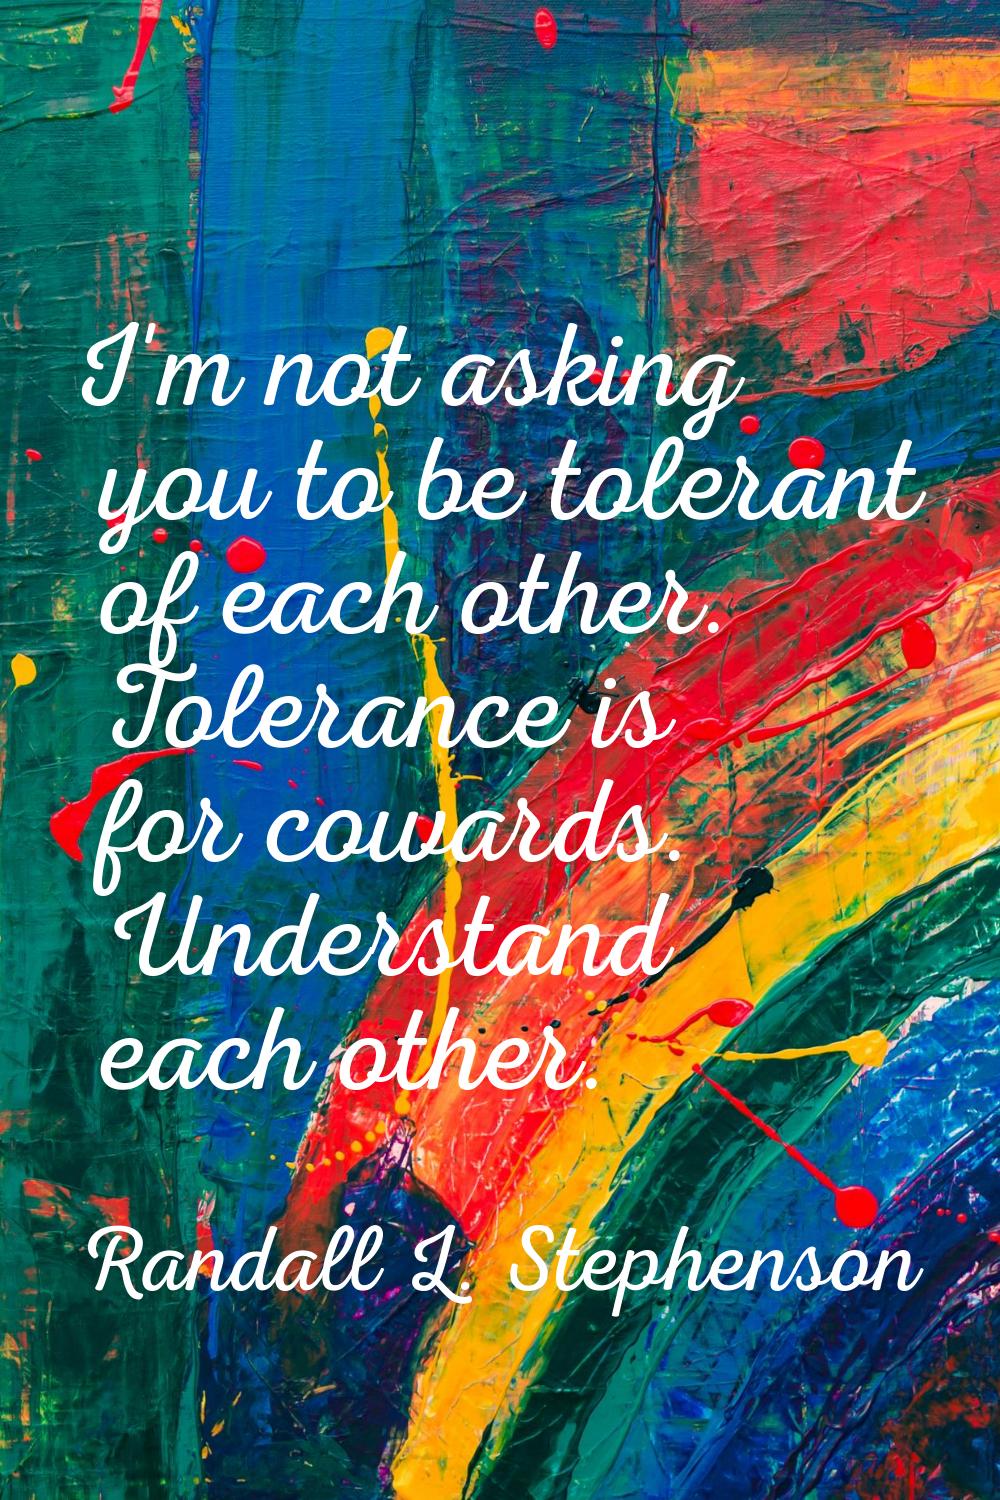 I'm not asking you to be tolerant of each other. Tolerance is for cowards. Understand each other.